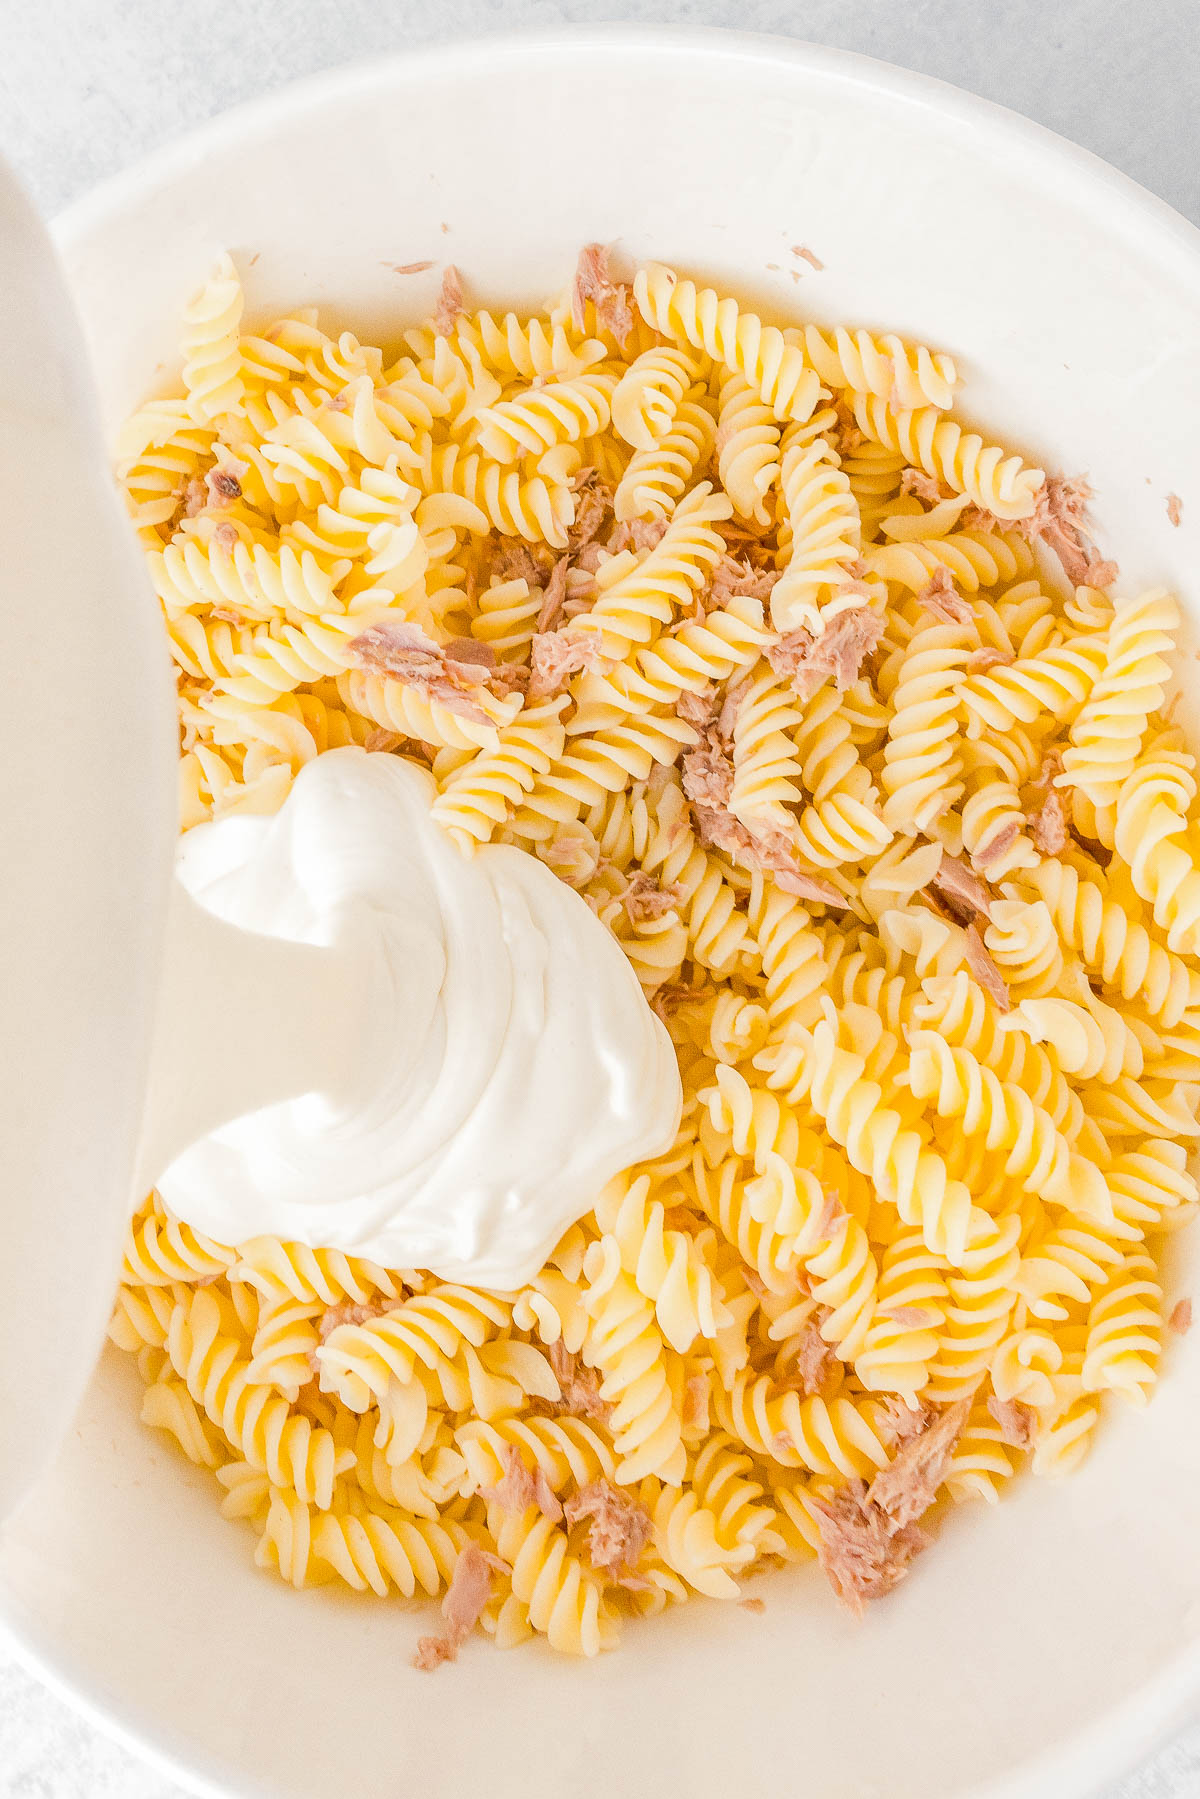 A bowl of rotini pasta mixed with shredded tuna, with a dollop of white creamy sauce being added on top.